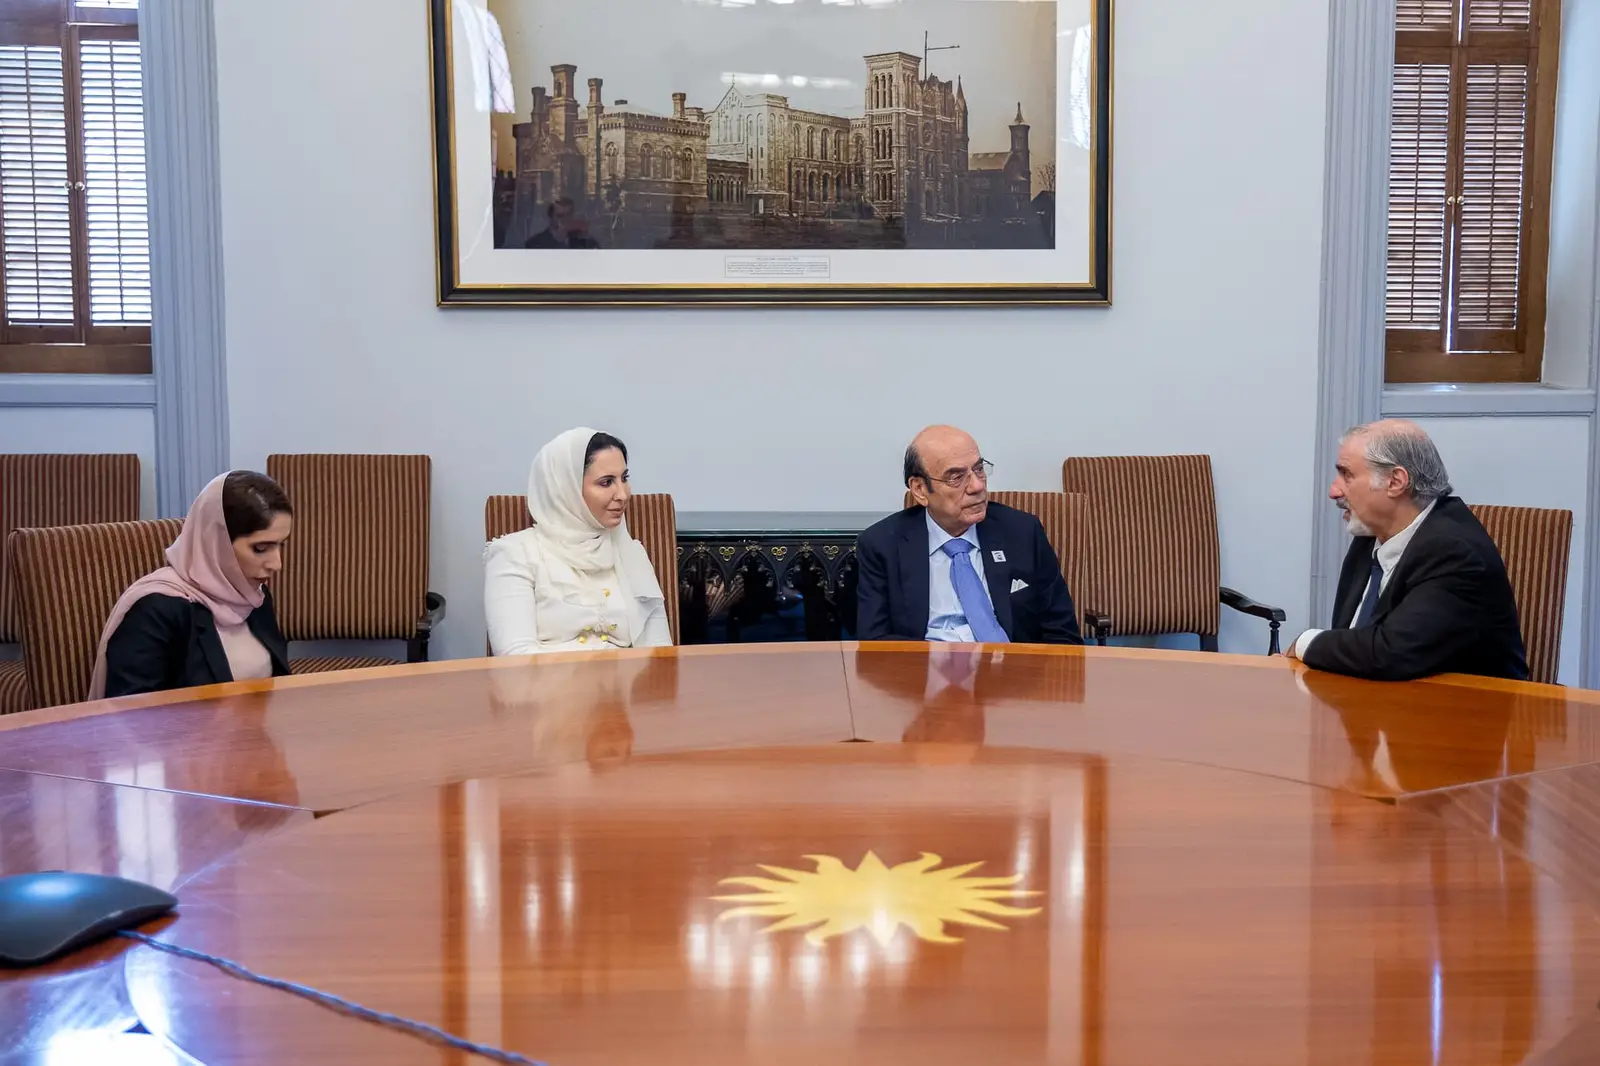 United Arab Emirates Public and Cultural Diplomacy Minister Discusses Ongoing and Future Partnerships with Smithsonian Institution and Freer Sackler Gallery